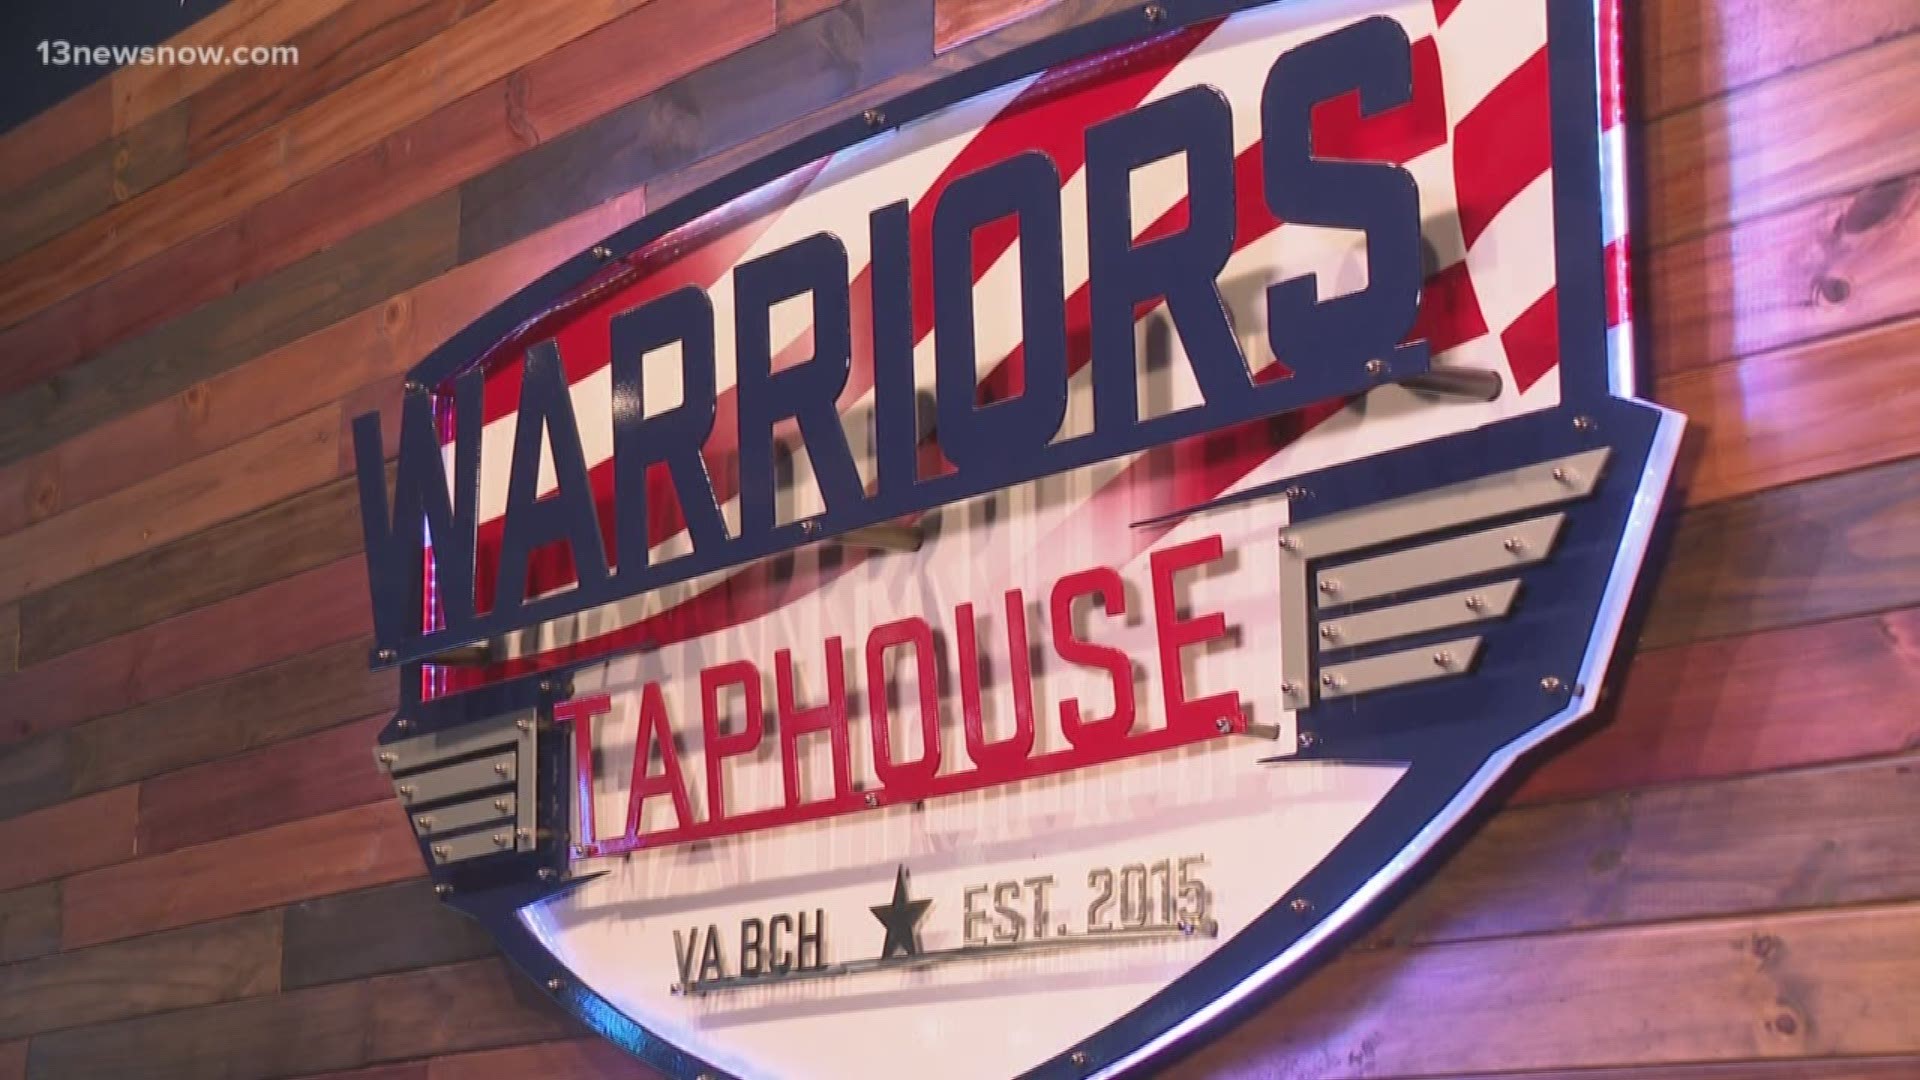 "I think the community is starting to understand what we do and what our purpose is for giving back," David Culler, owner of Warriors Taphouse, said.